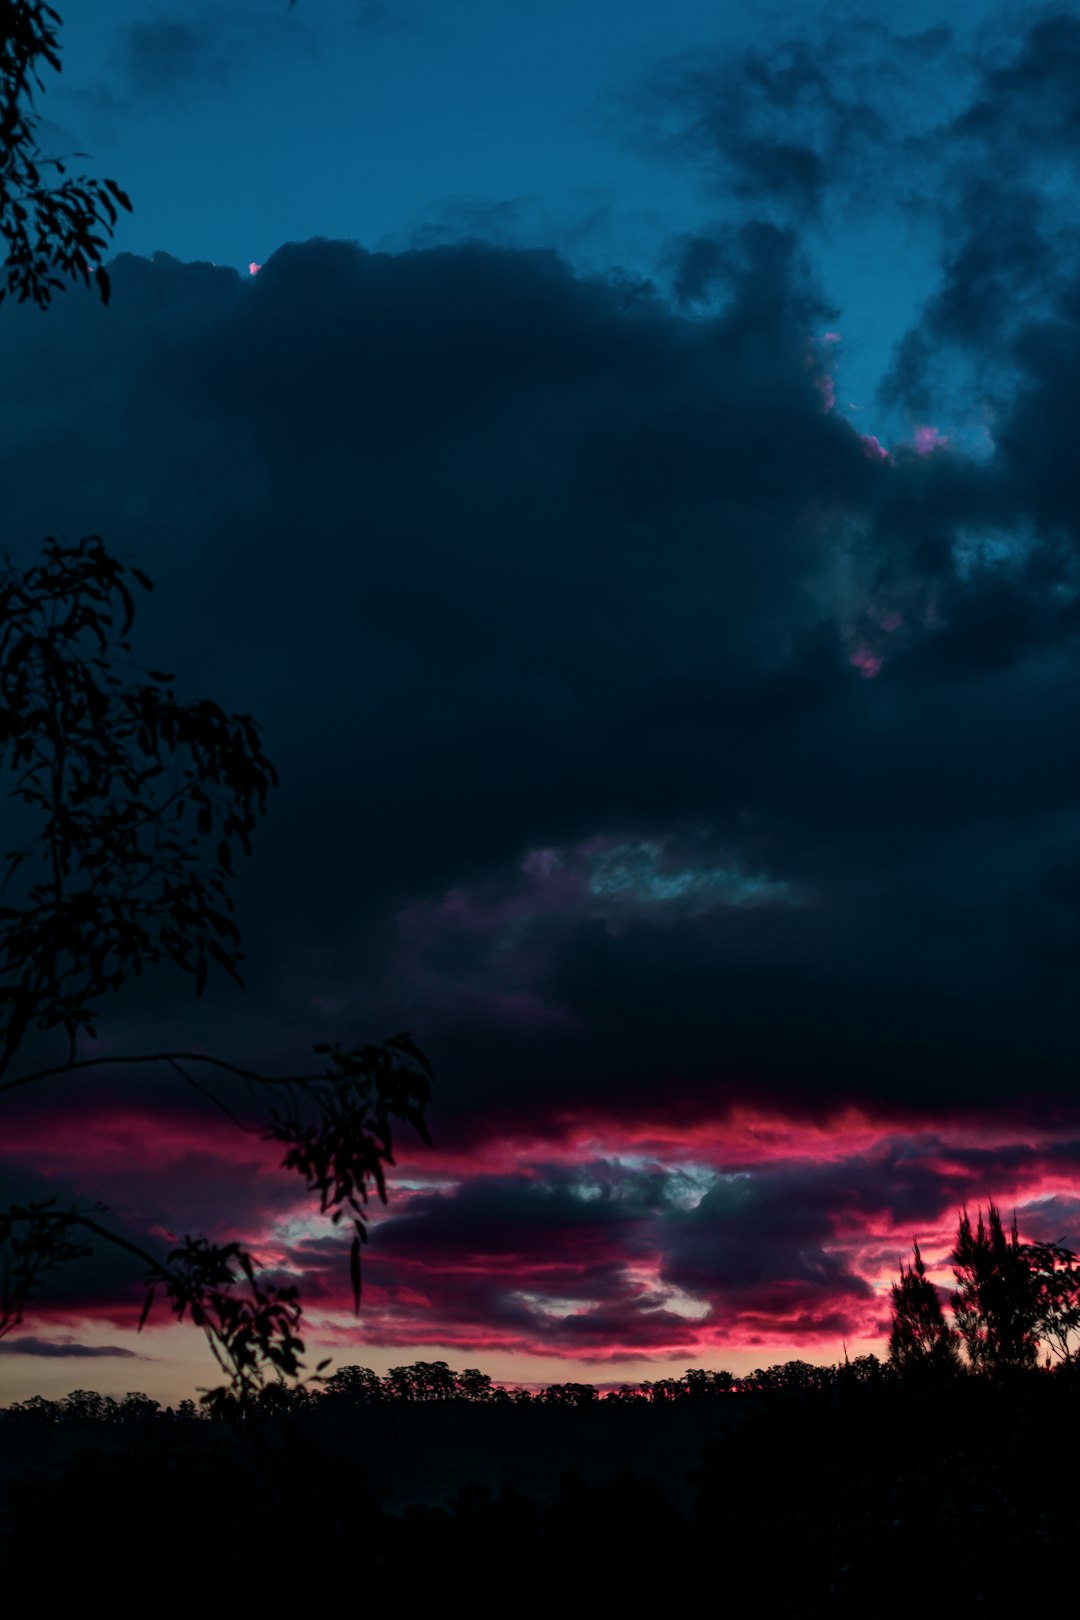 silhouette of trees under cloudy sky during sunset